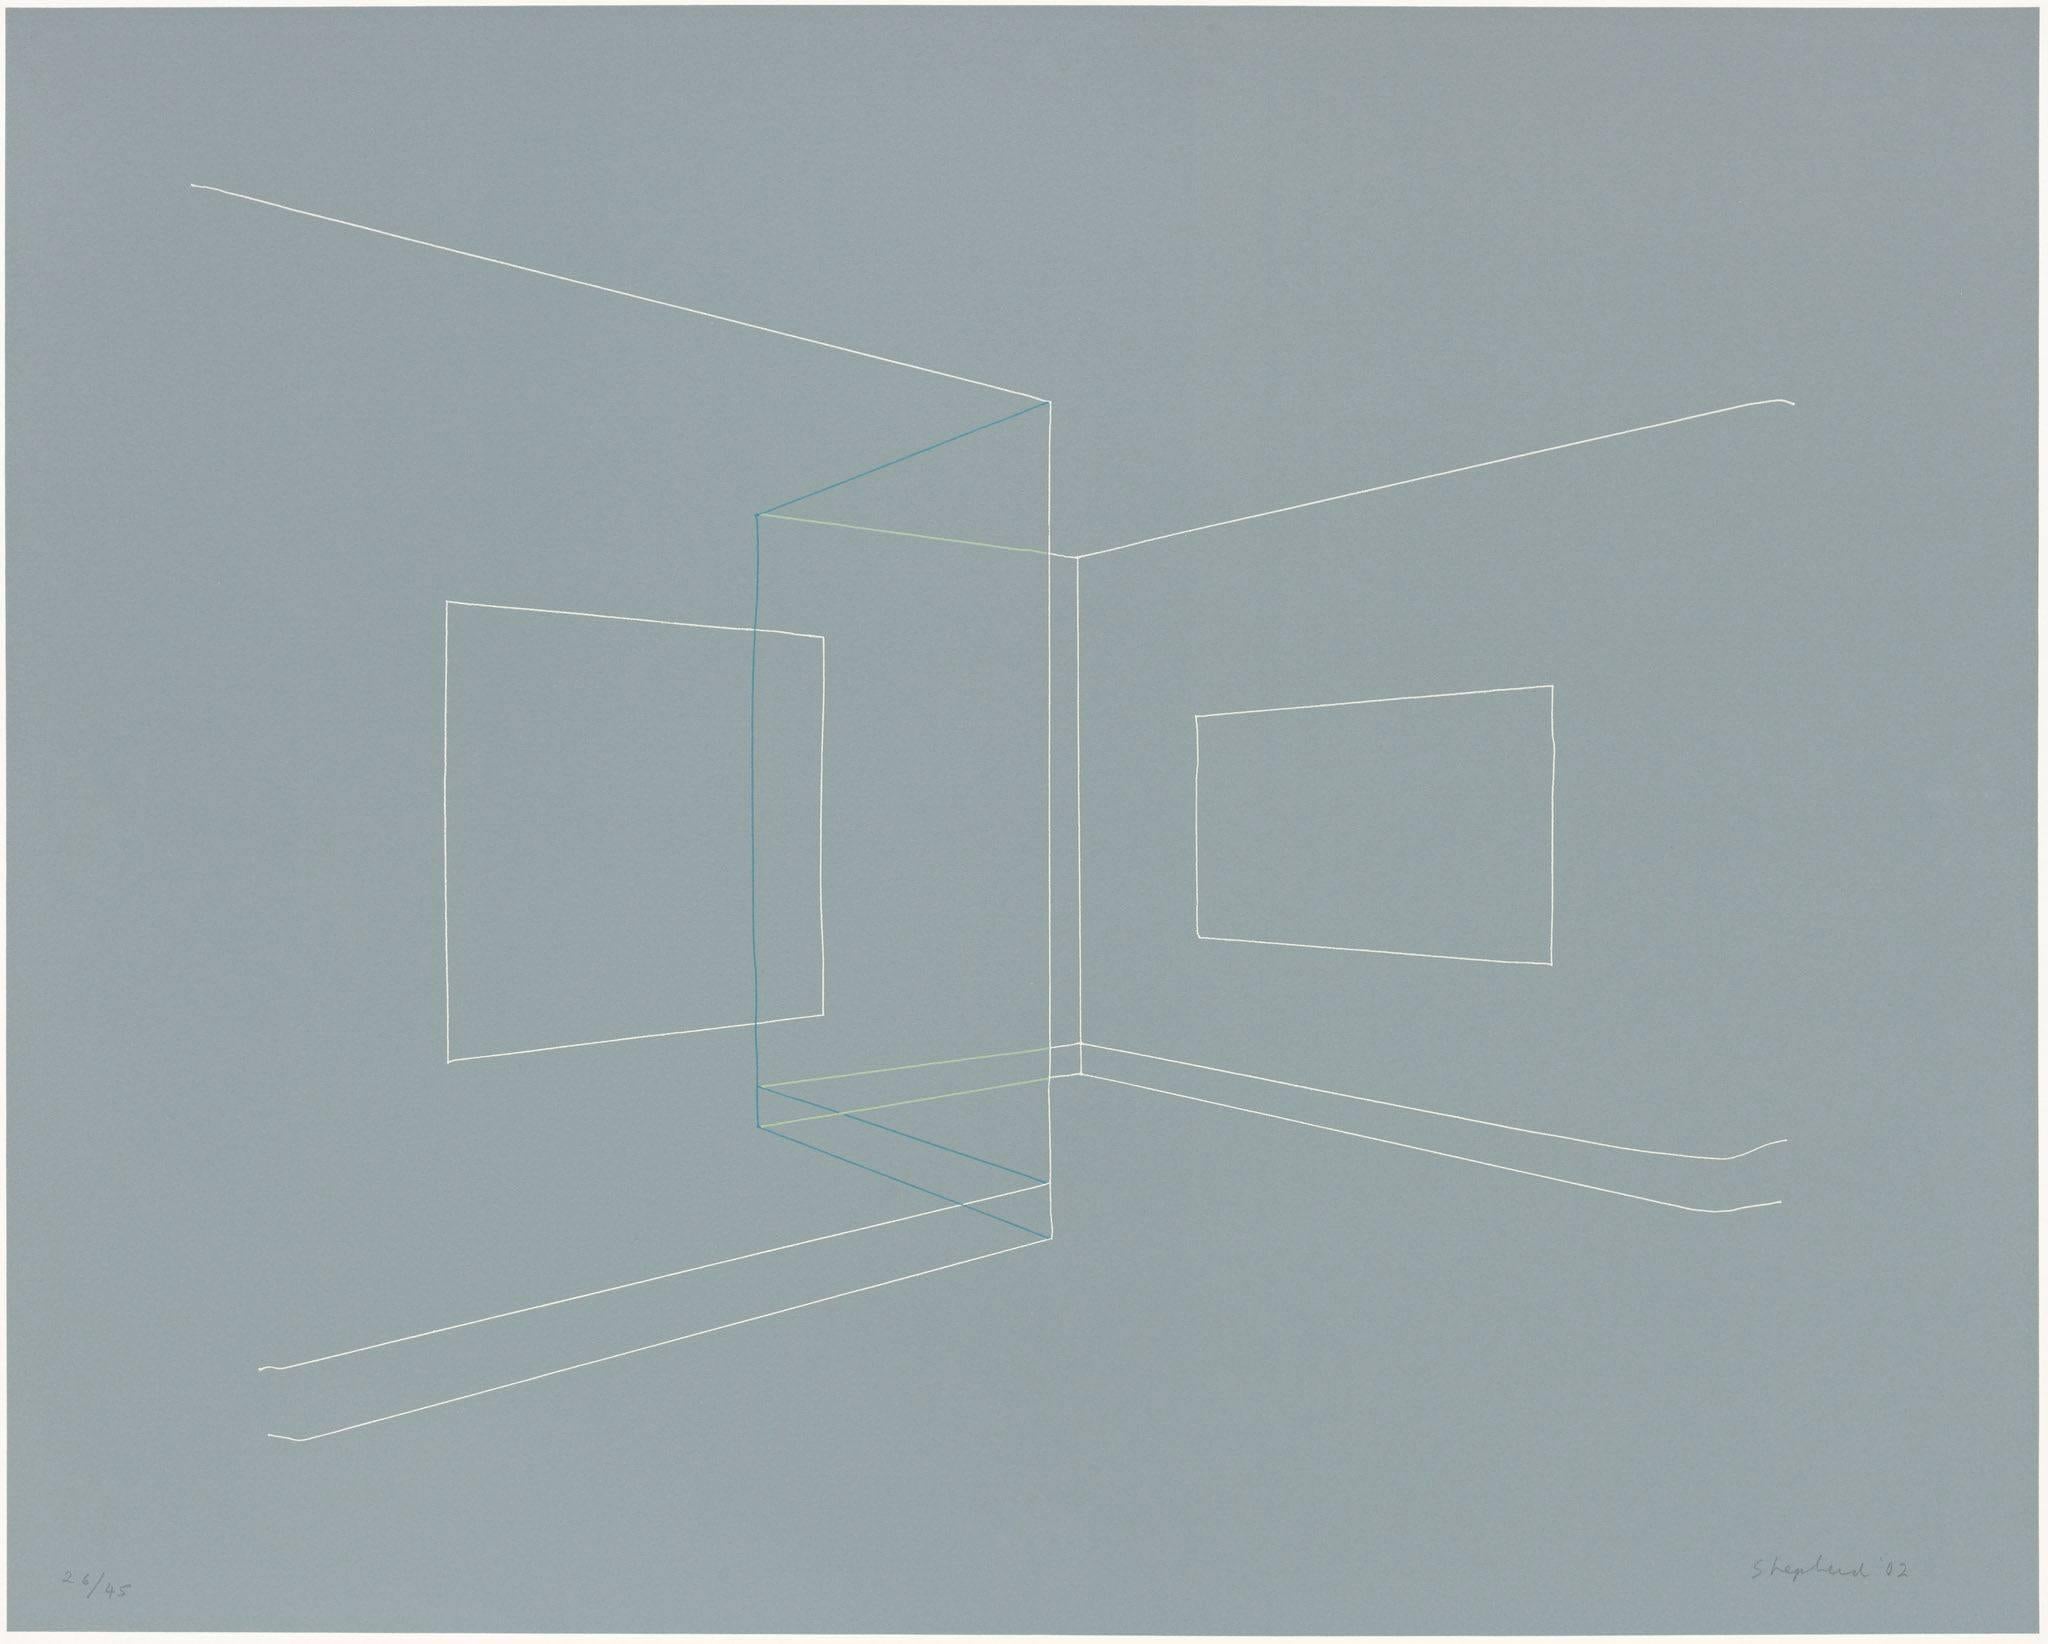 Kate Shepherd Abstract Print - Floating Image, Transparent Walls, Thread Lines on Grey